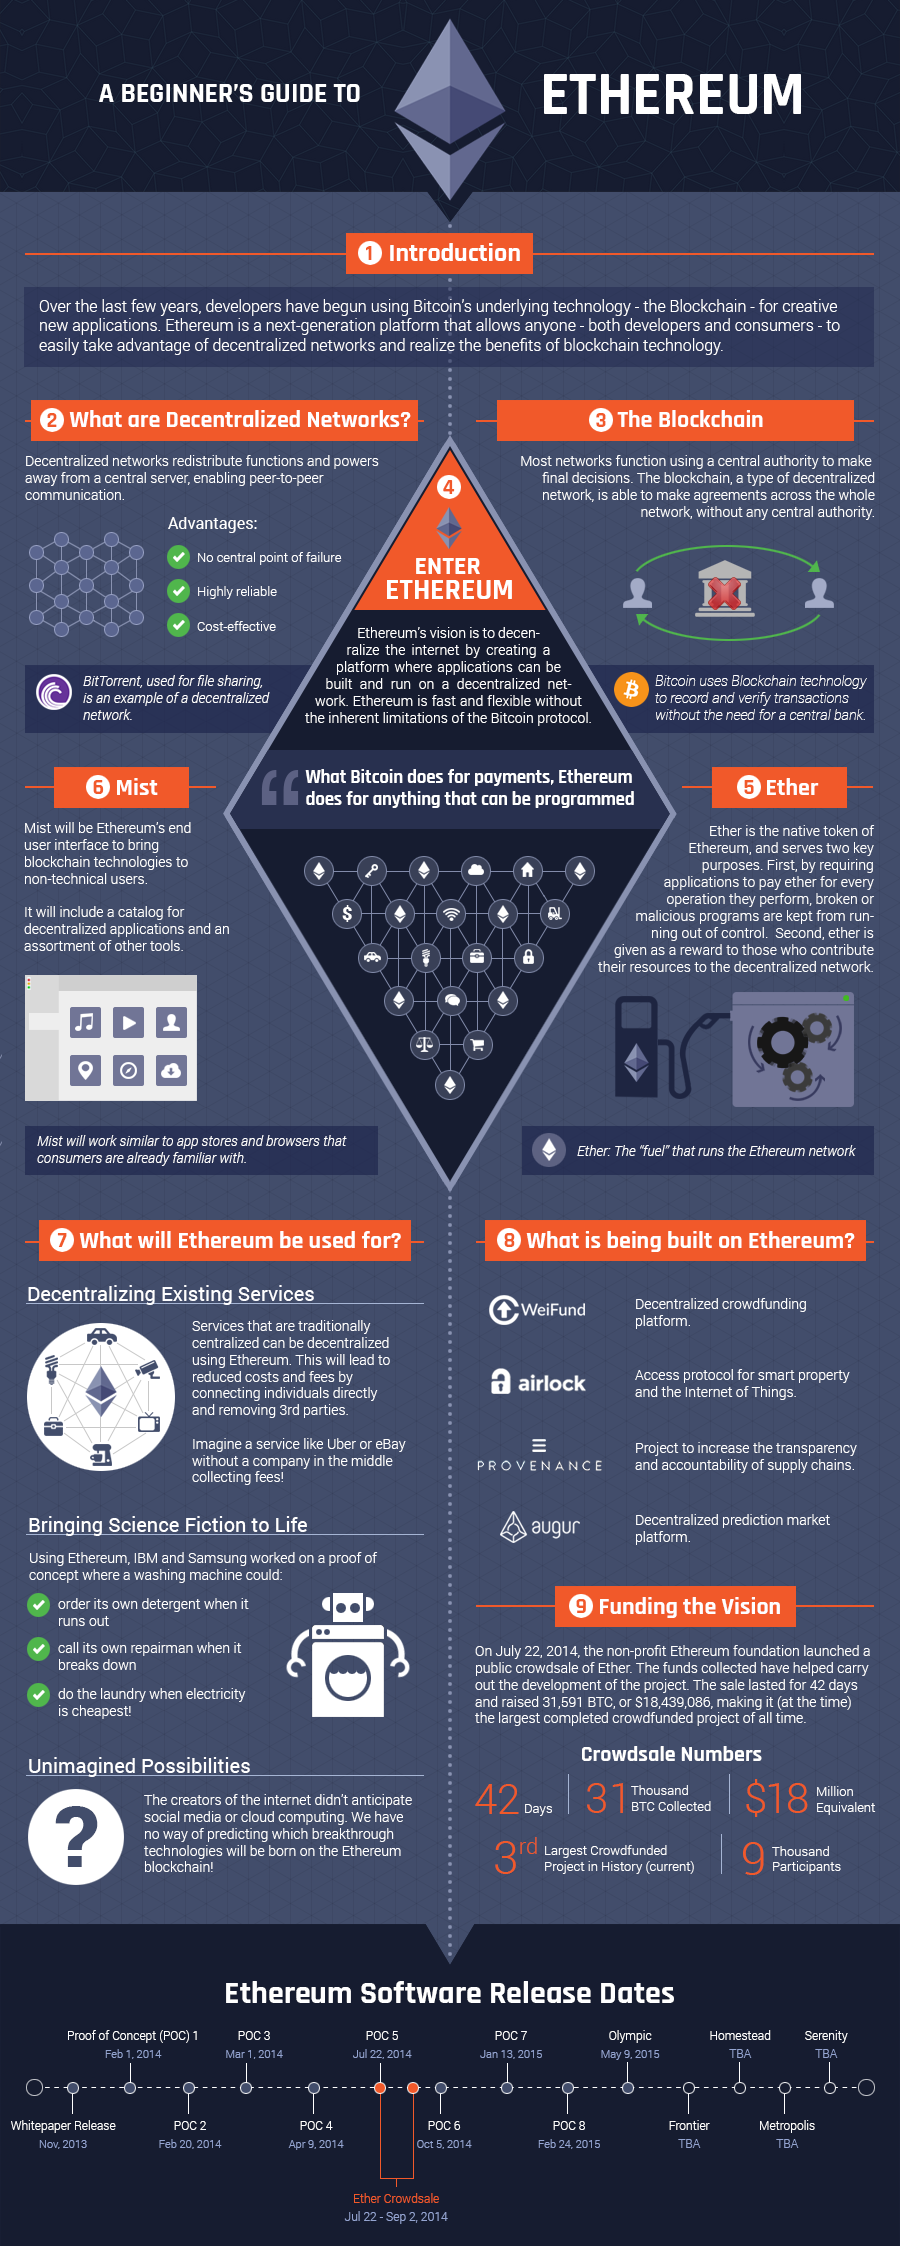 Ethereum Infographic Image - Beginners Guide